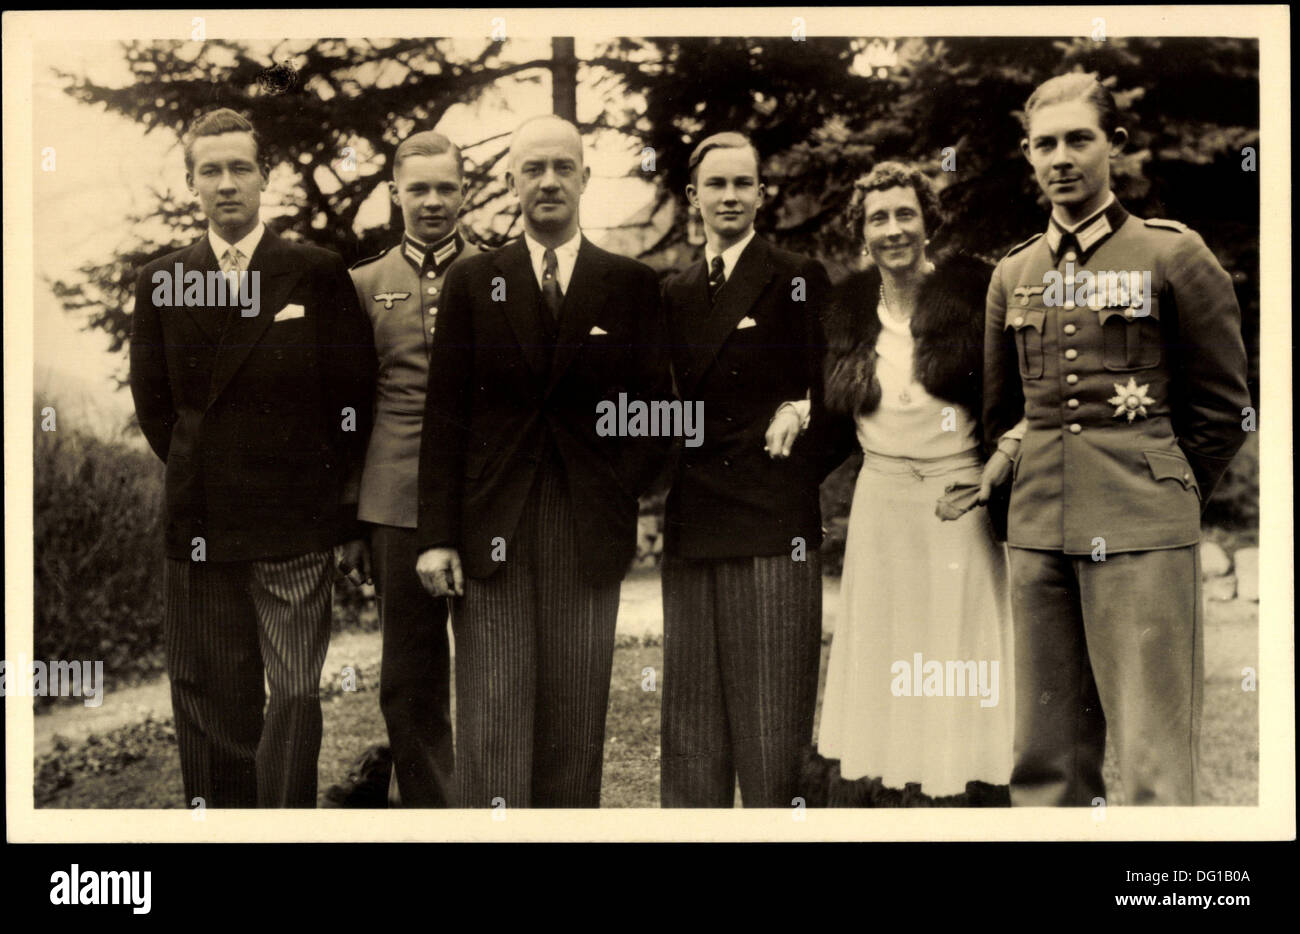 Grand duke of oldenburg Stock Photos and Images